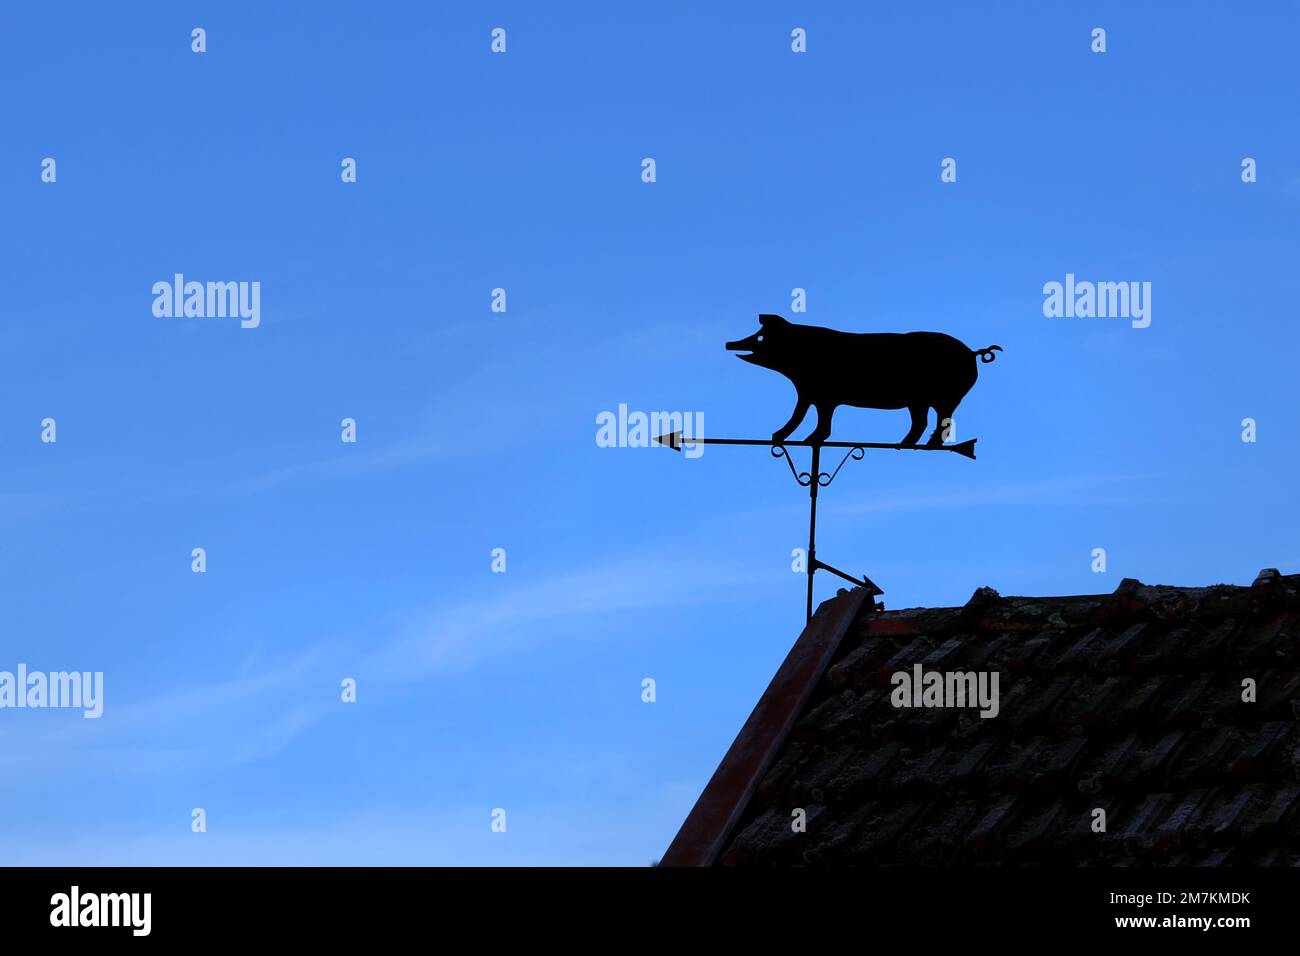 Pig shaped wind vane on top of the roof of a farm building silhouetted against blue sky. Stock Photo